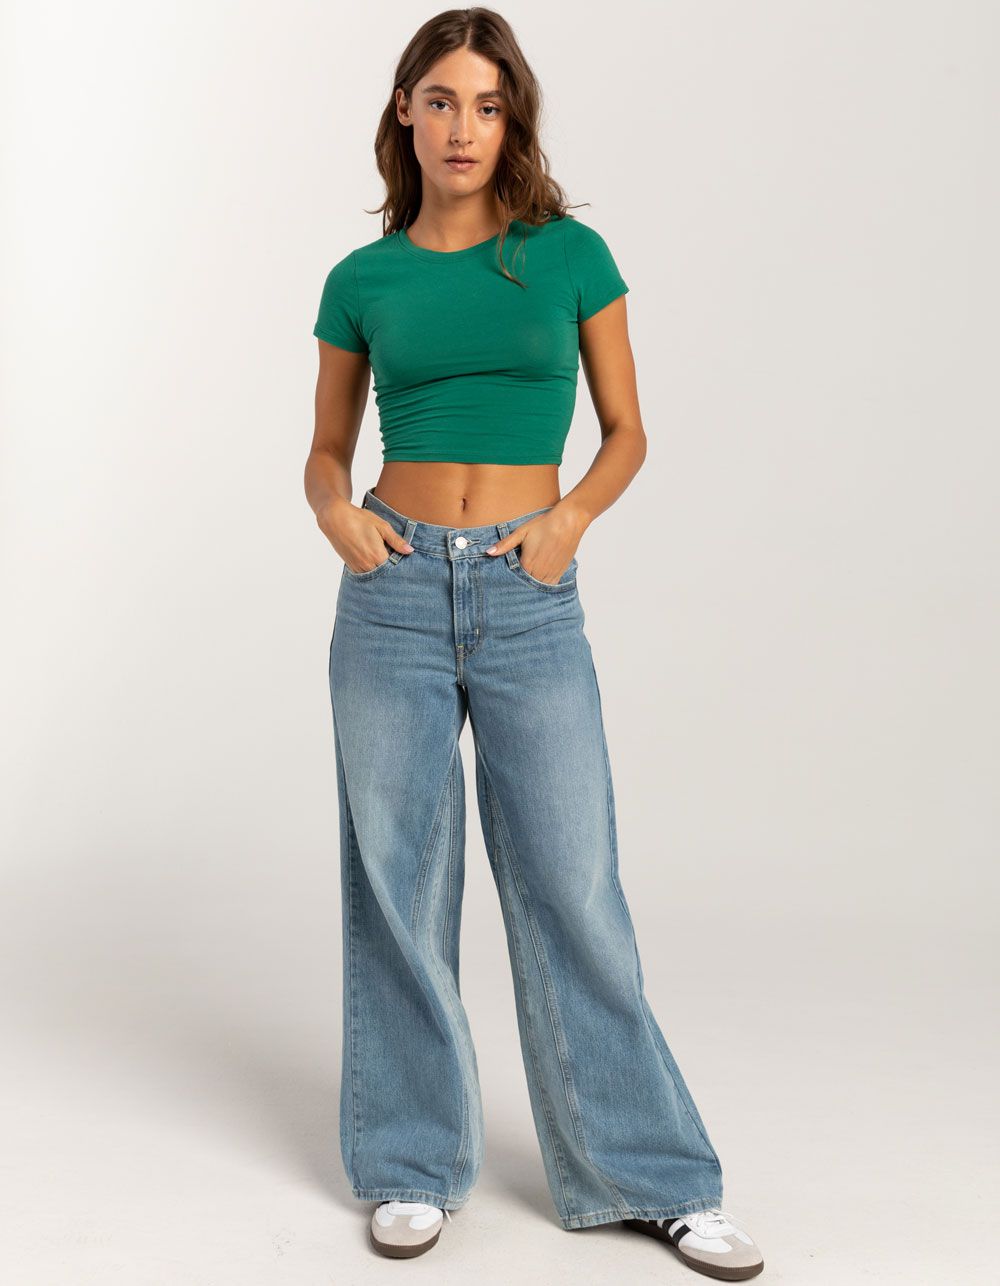 BOZZOLO Womens Cropped Tee | Tillys